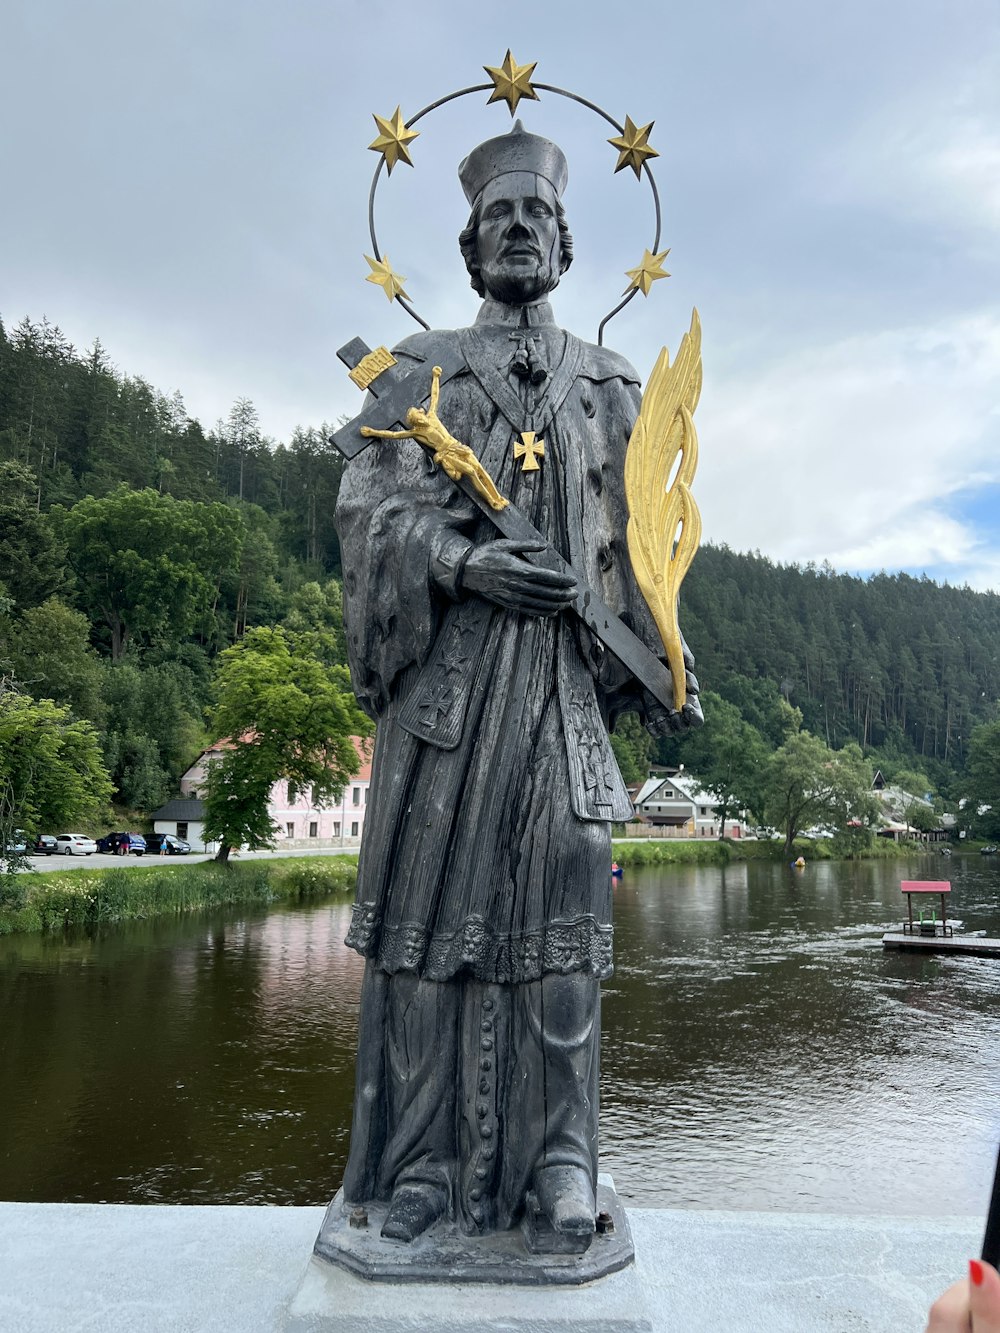 a statue of a person holding a staff and a crown